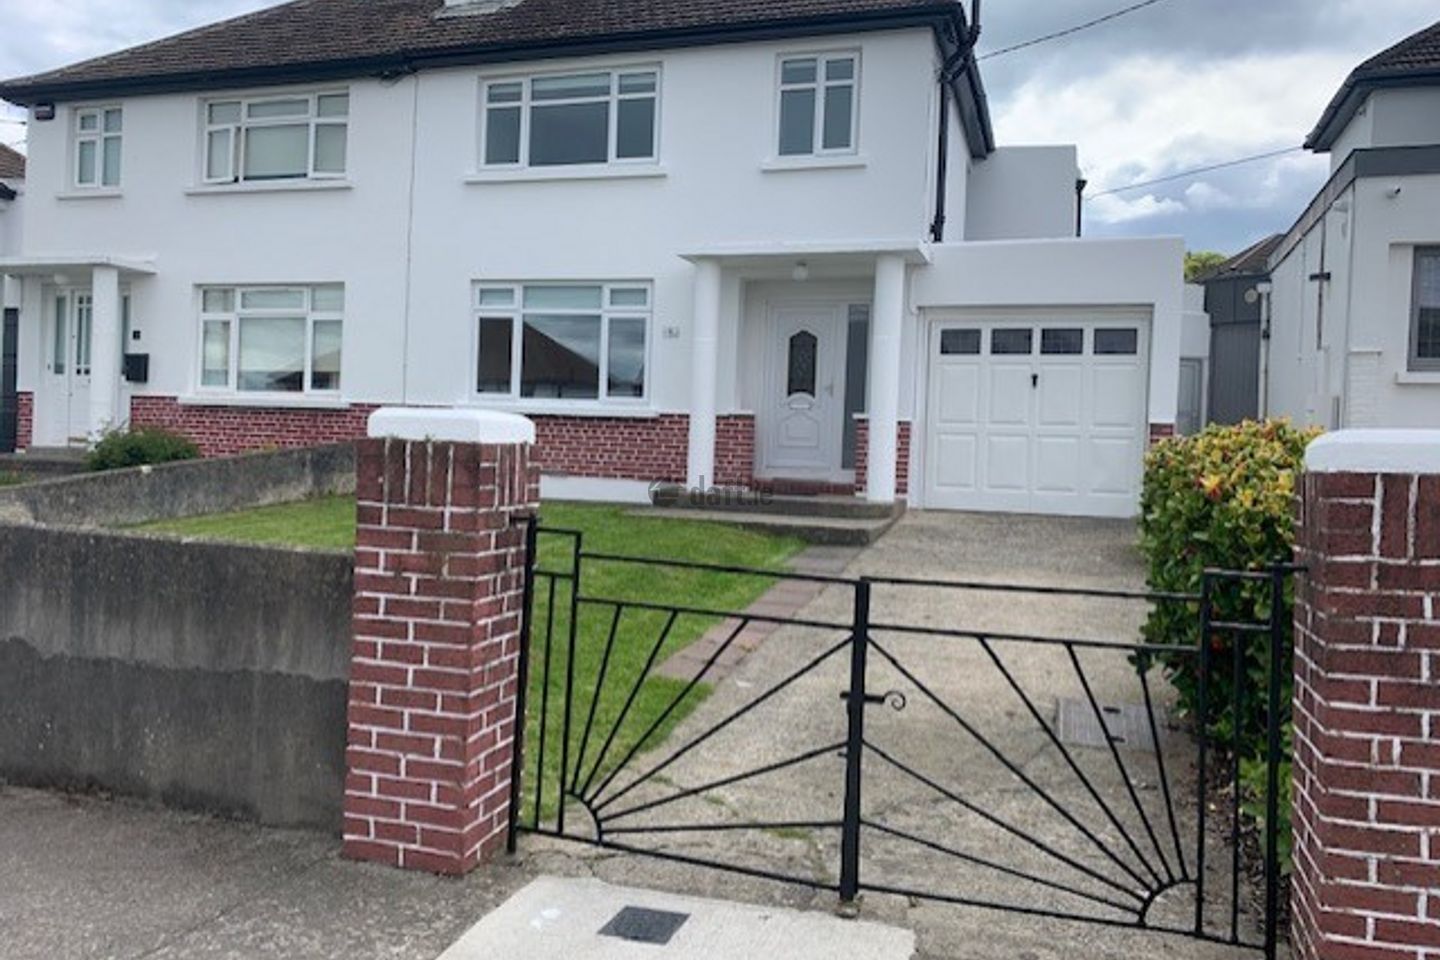 4 Camaderry Road, Bray, Co. Wicklow